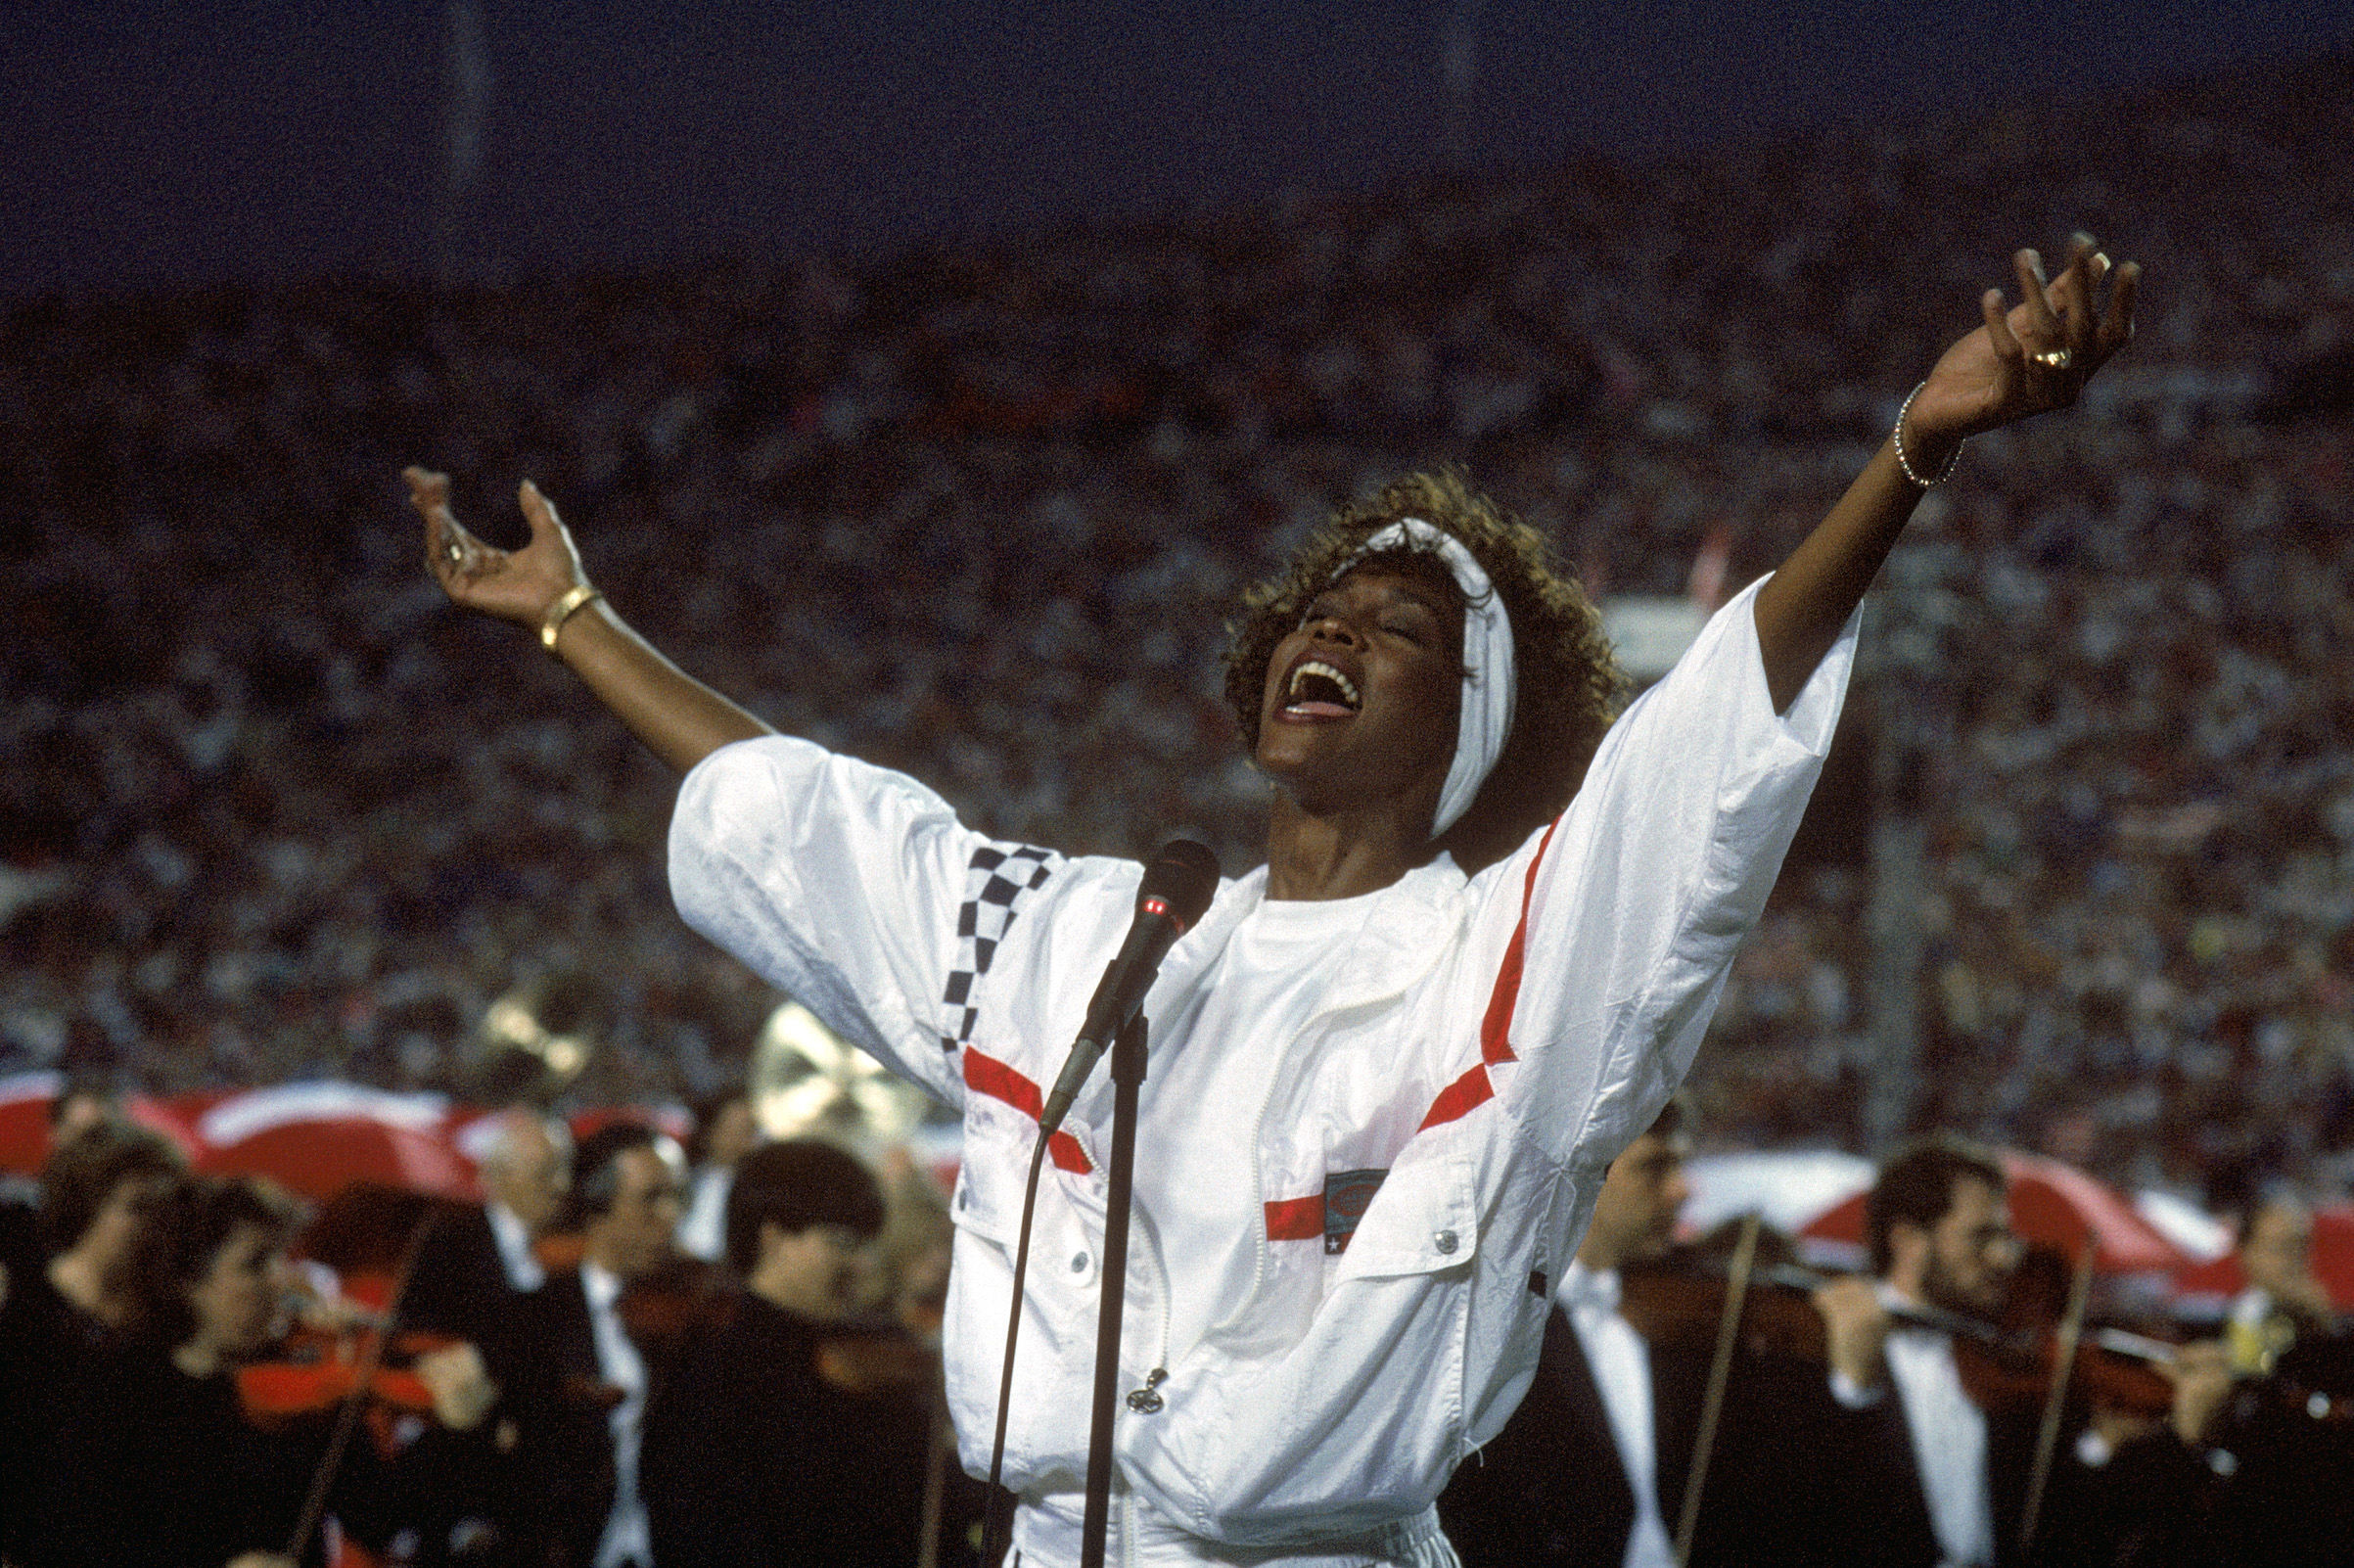 Whitney Houston sings the National Anthem before a game with the New York Giants taking on the Buffalo Bills prior to Super Bowl XXV at Tampa Stadium on Jan. 27, 1991 in Tampa, Fla. (Getty Images)